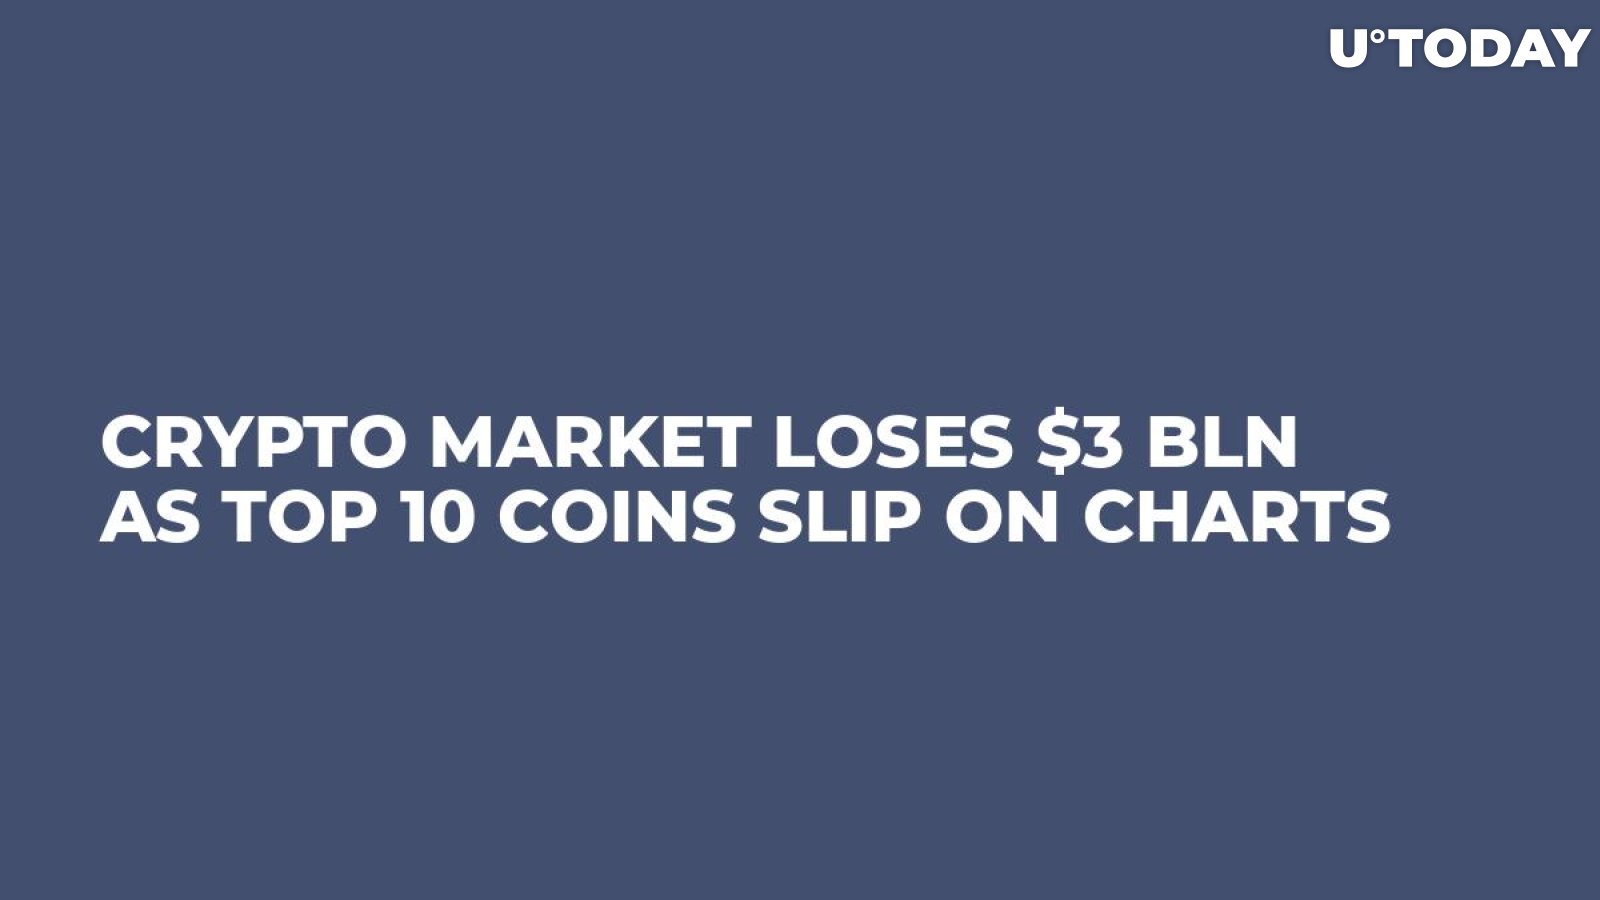 Crypto Market Loses $3 Bln as Top 10 Coins Slip On Charts